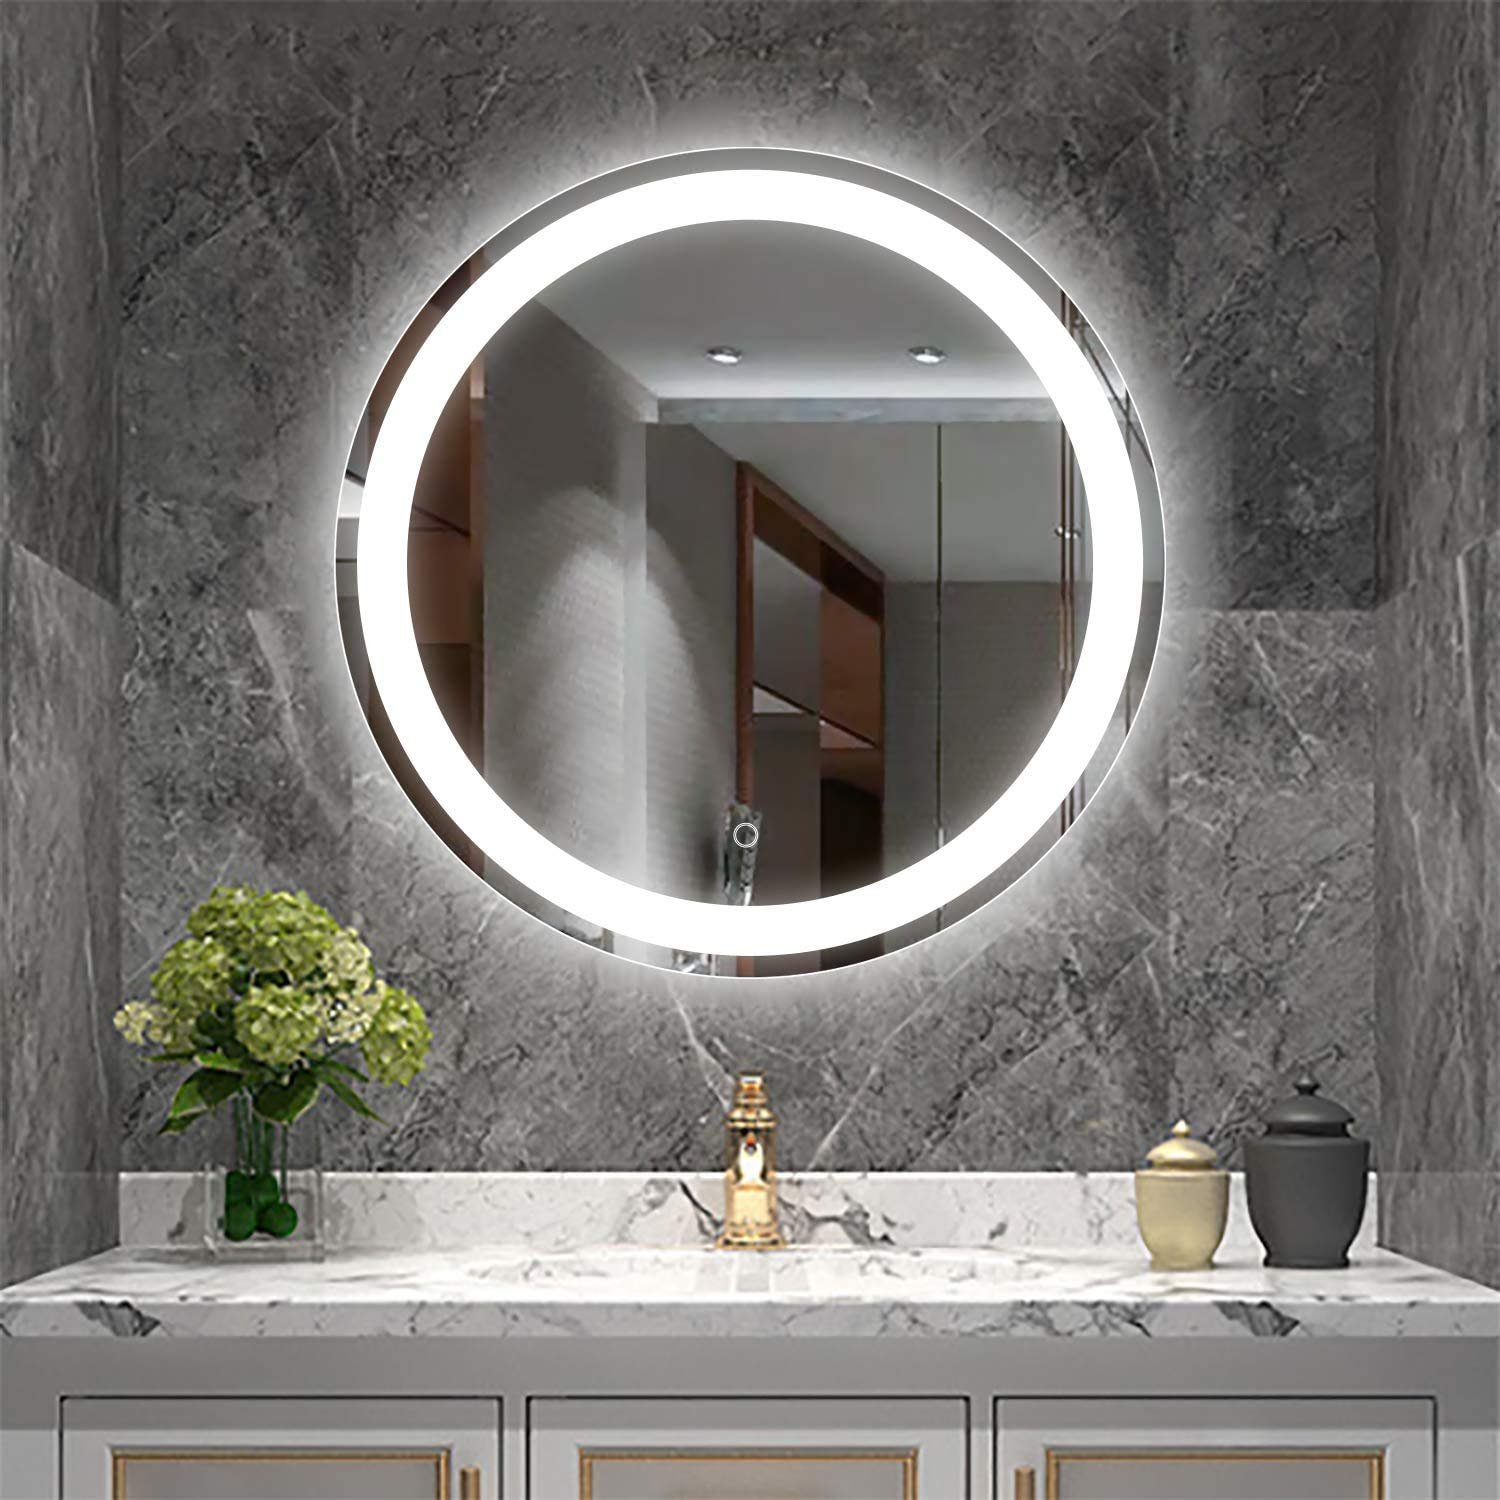 How LED Mirrors with Bluetooth Technology Are Revolutionizing Your Morning Routine